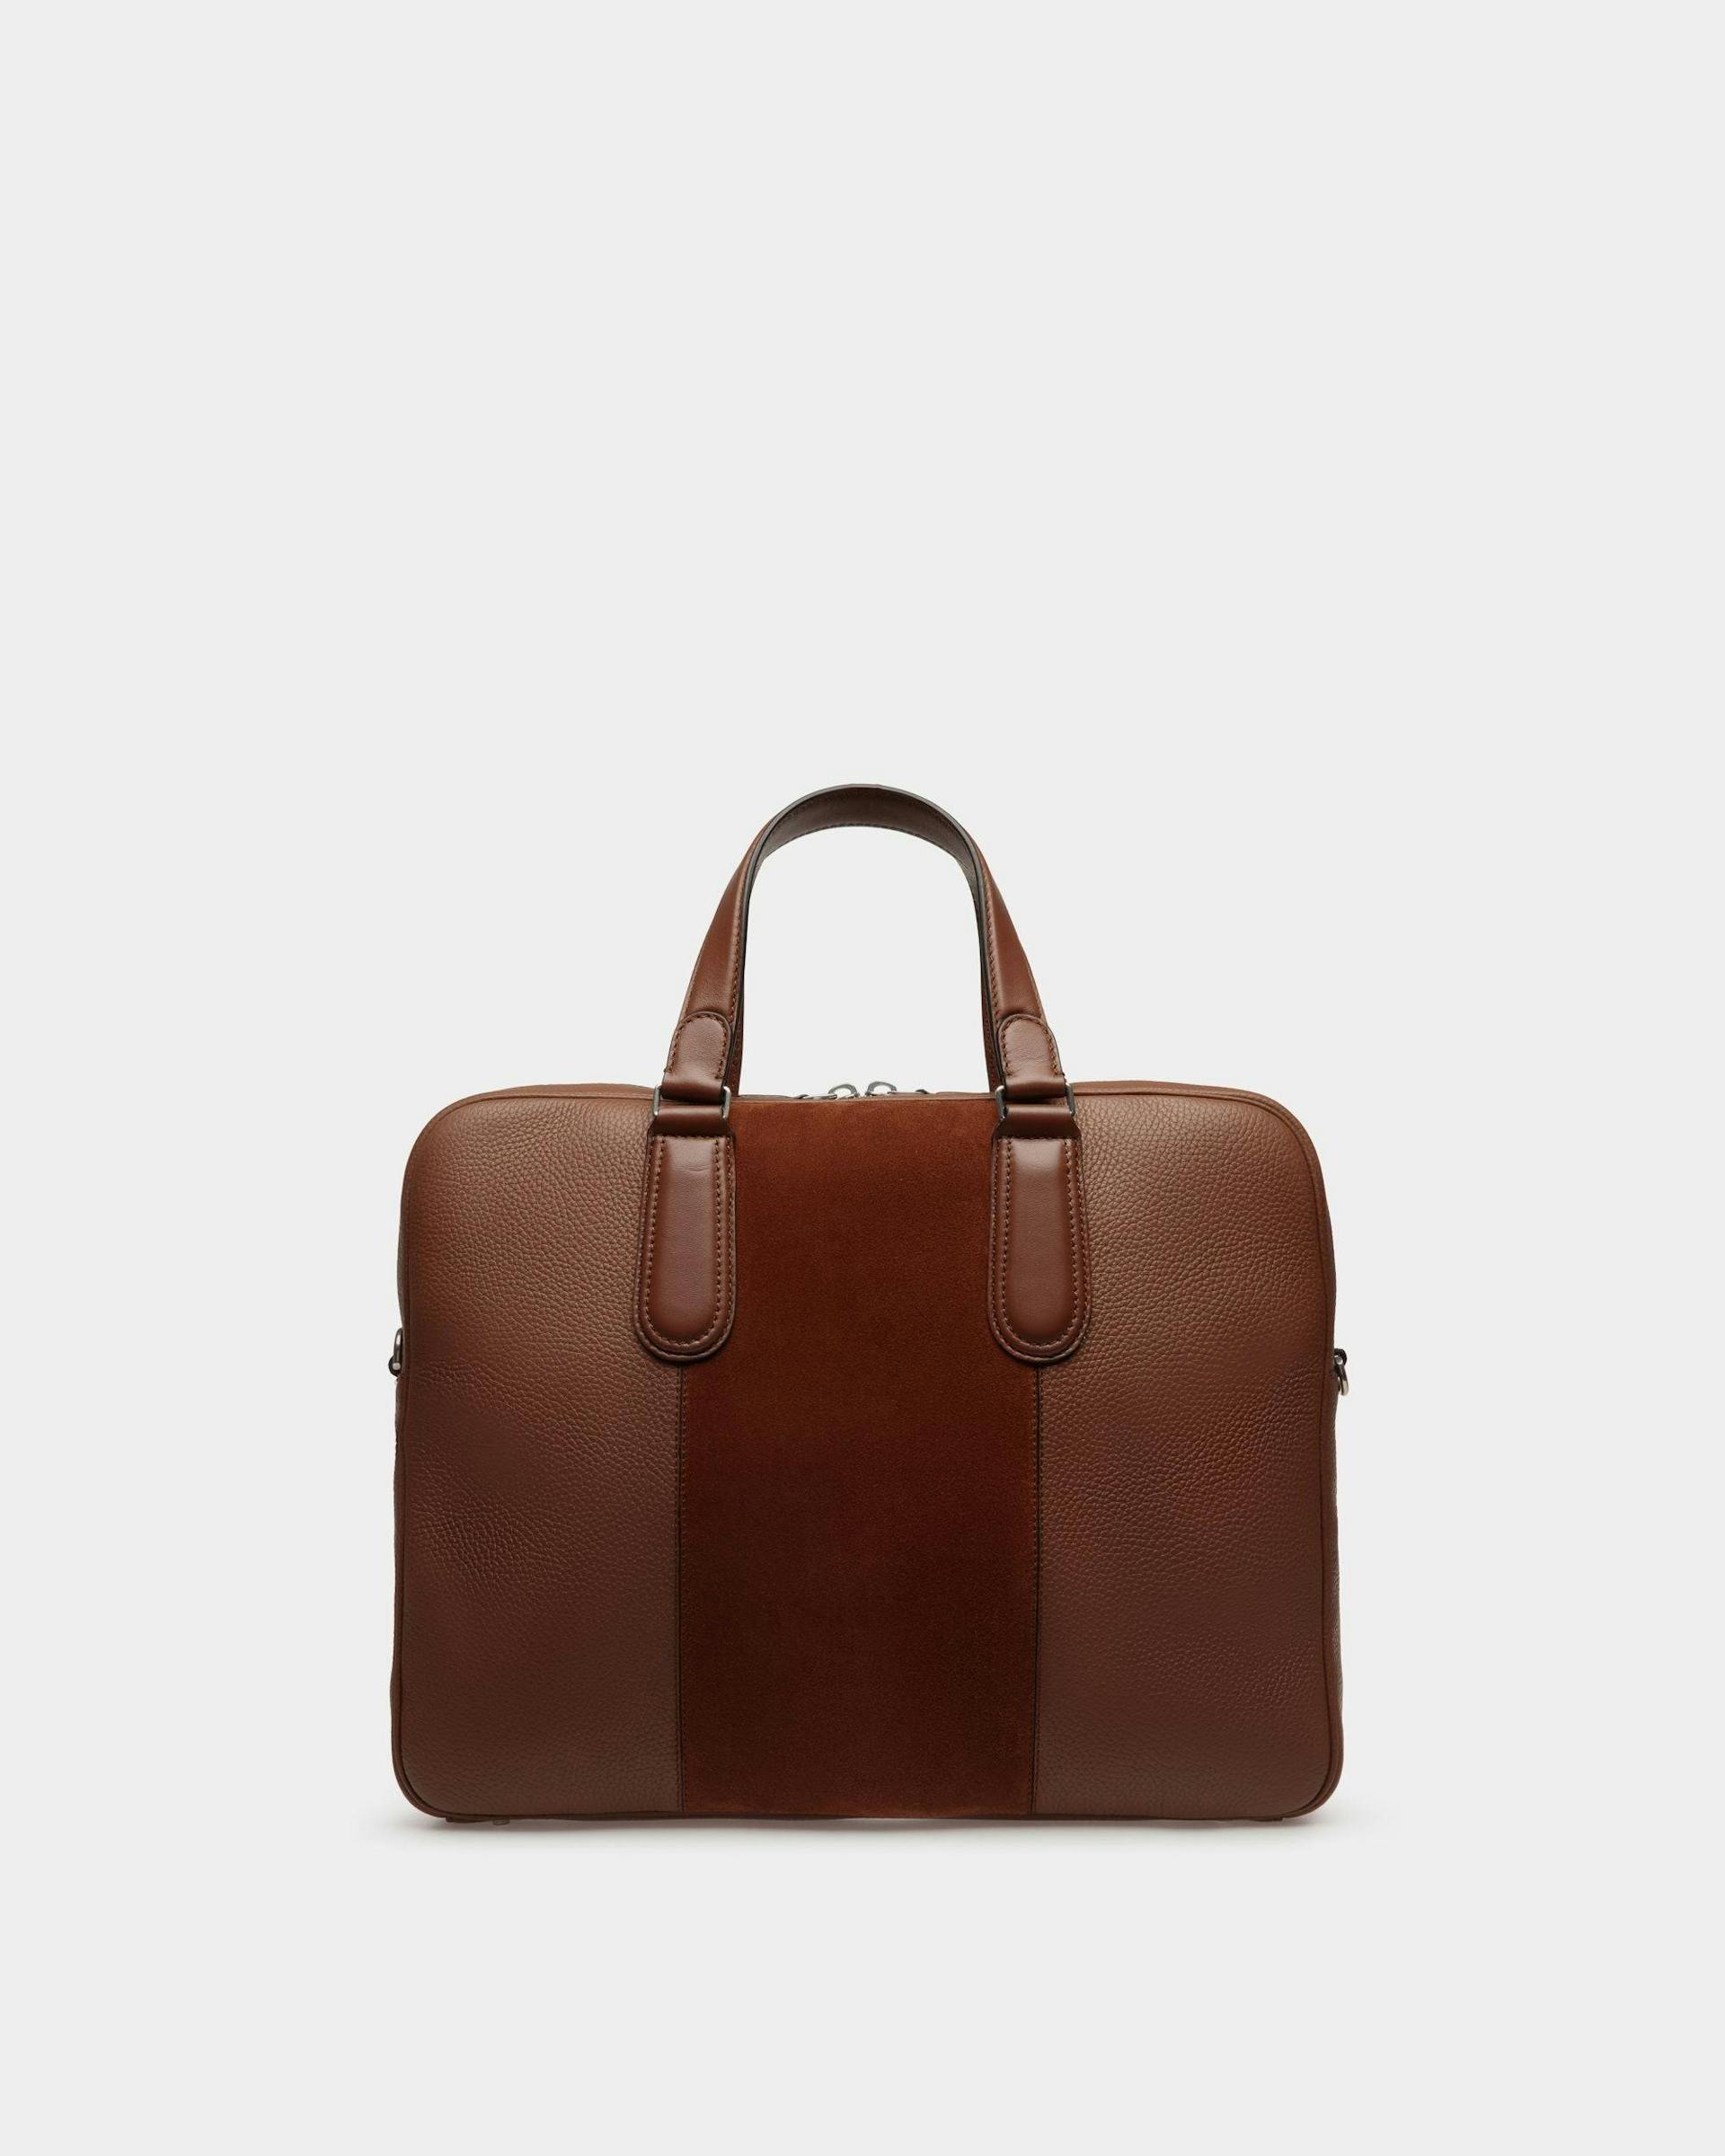 Men's Spin Briefcase in Brown Leather | Bally | Still Life Back